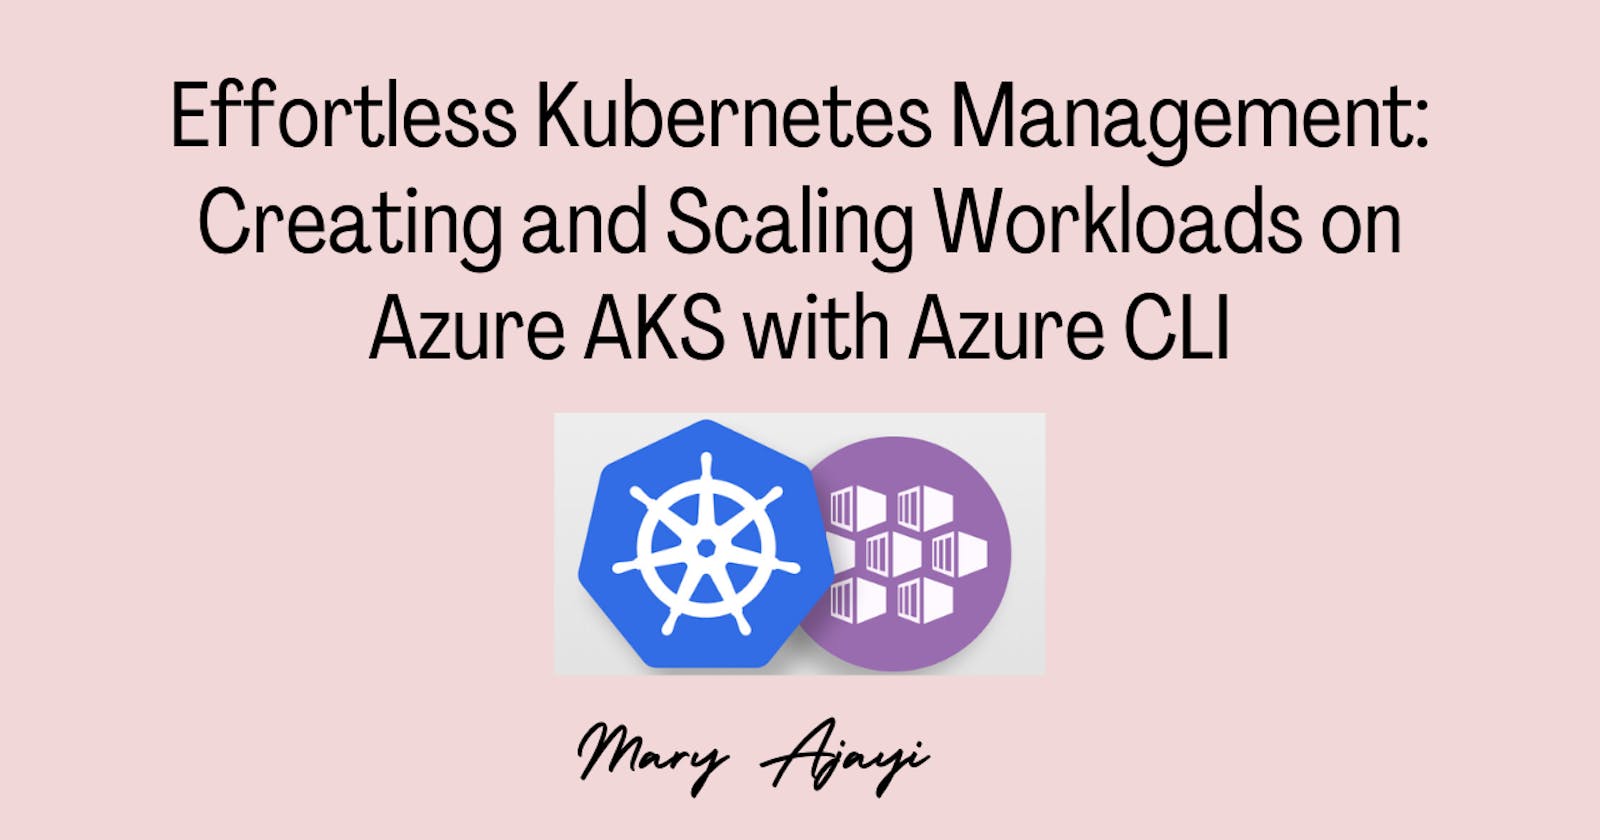 Effortless Kubernetes Management: Creating and Scaling Workloads on Azure AKS with Azure CLI